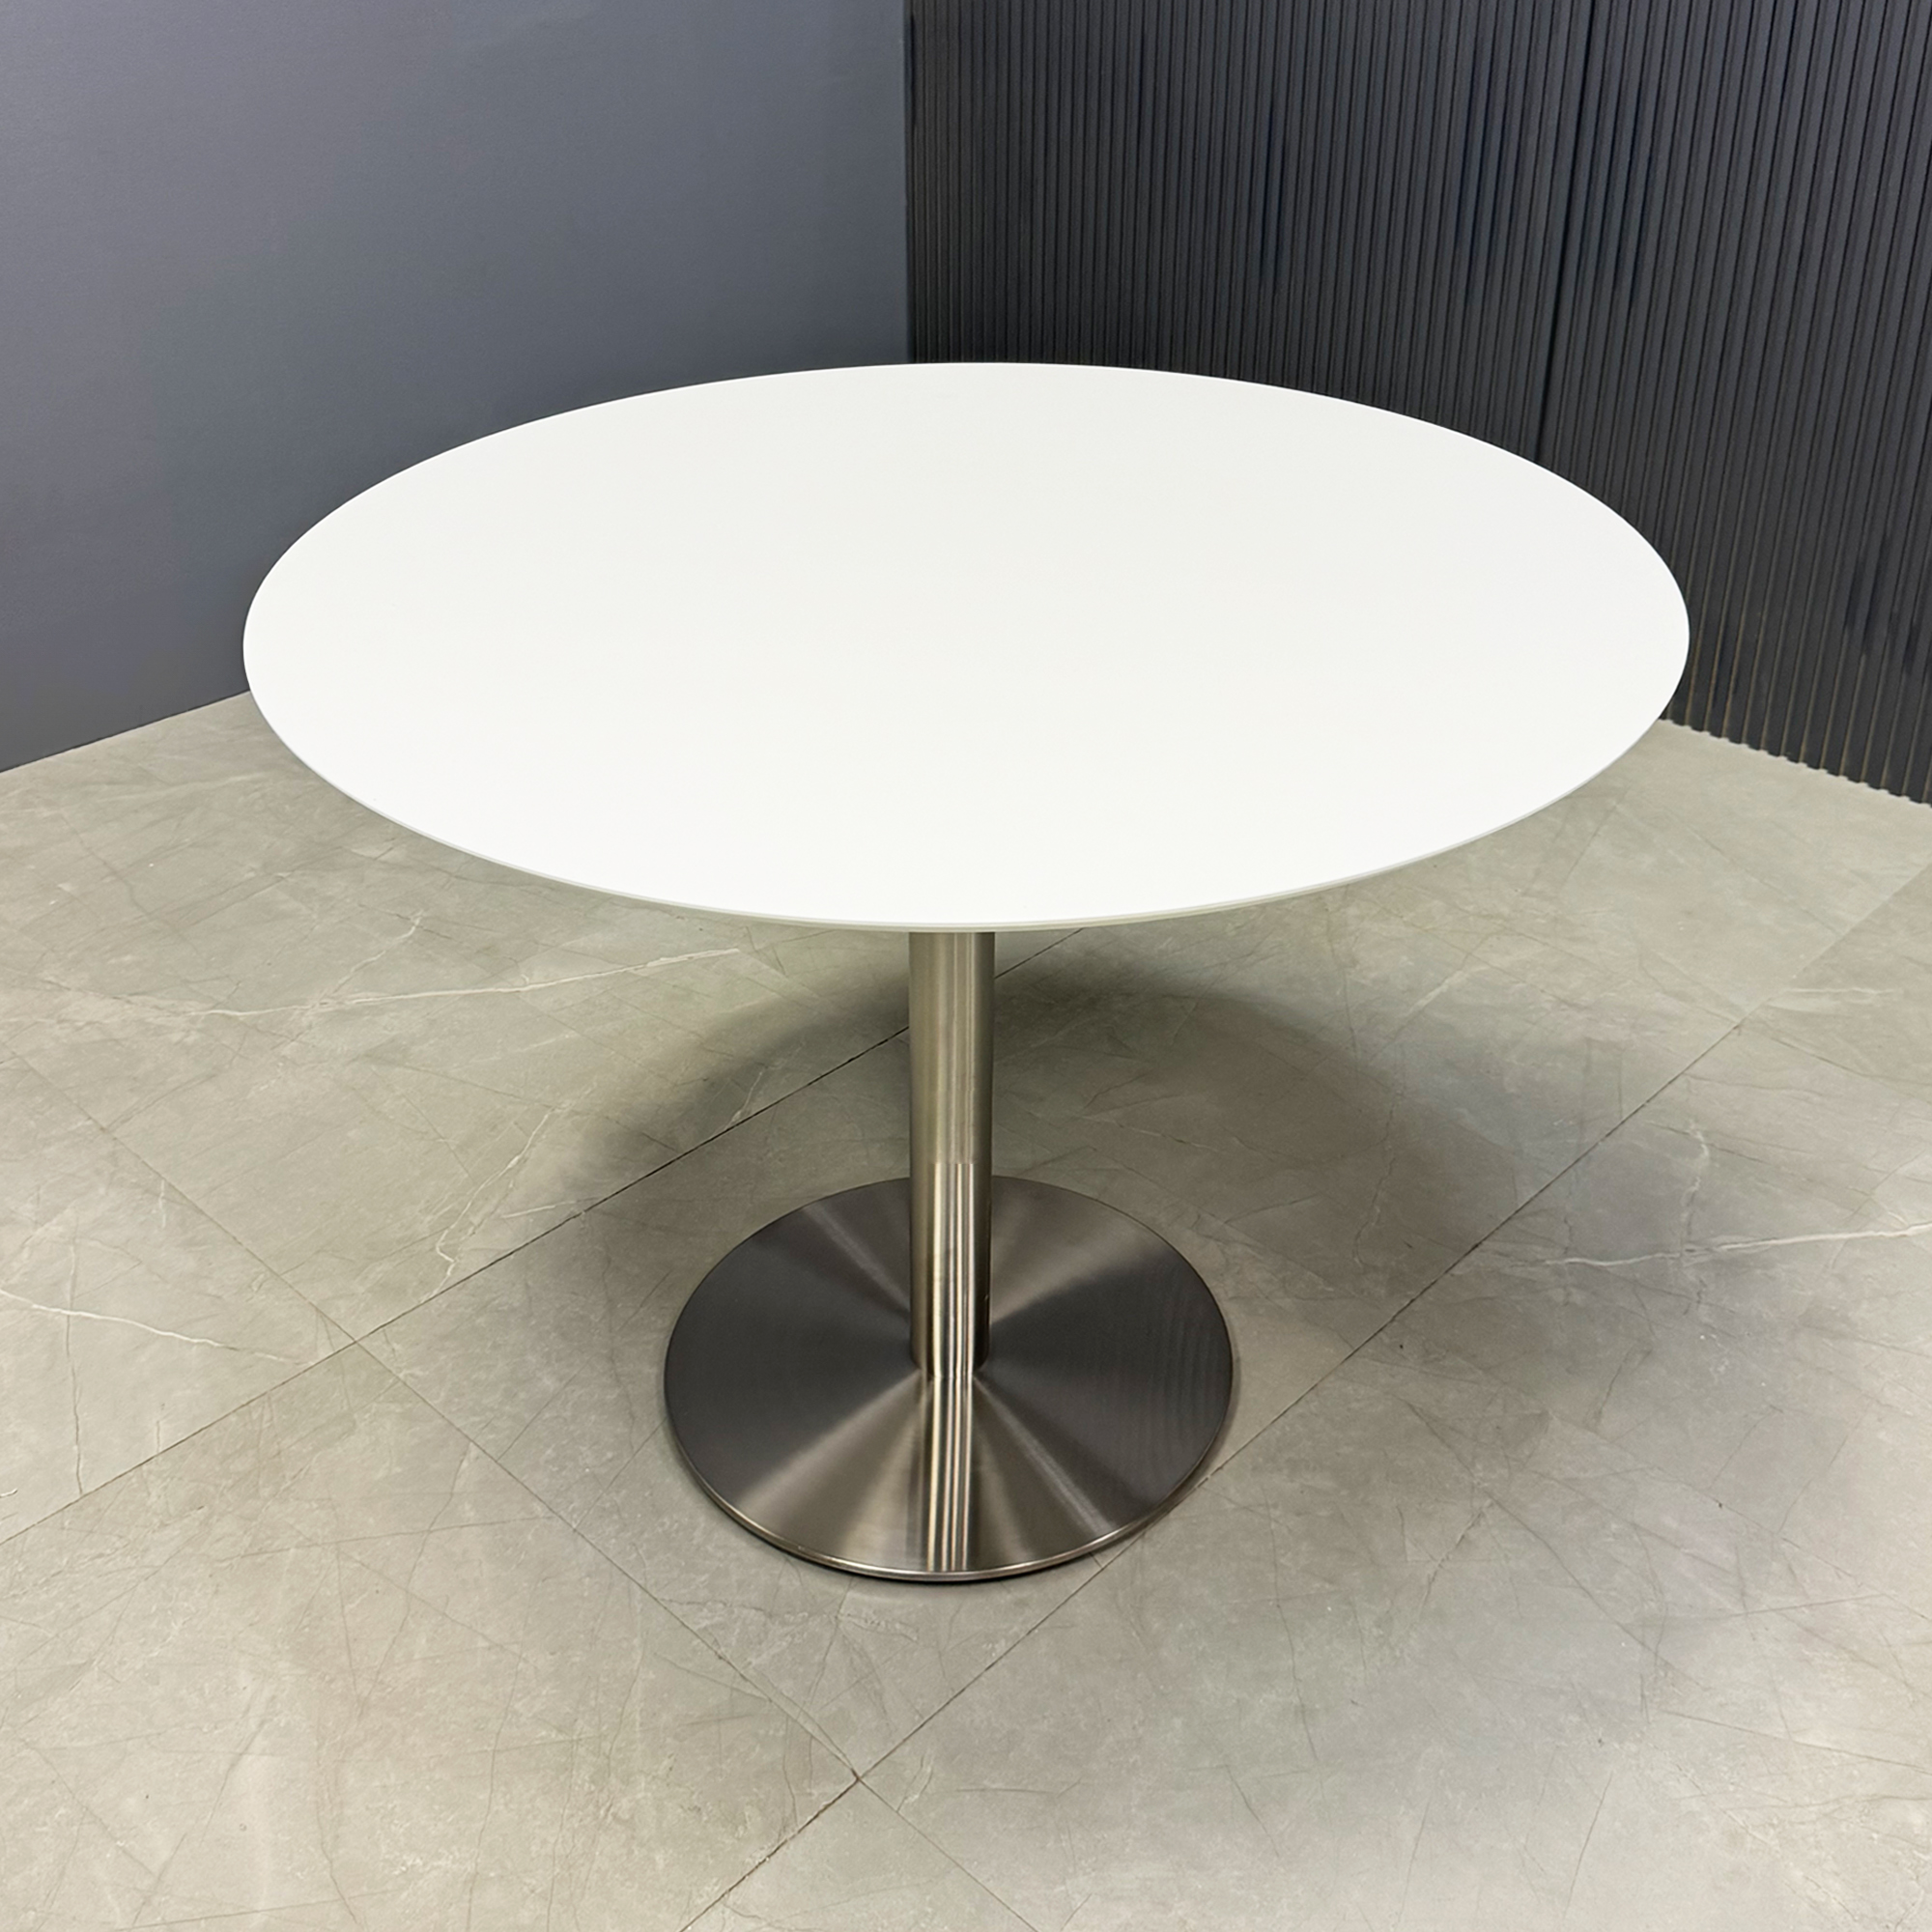 36-inch California Round Conference/Cafeteria Table with 1/2